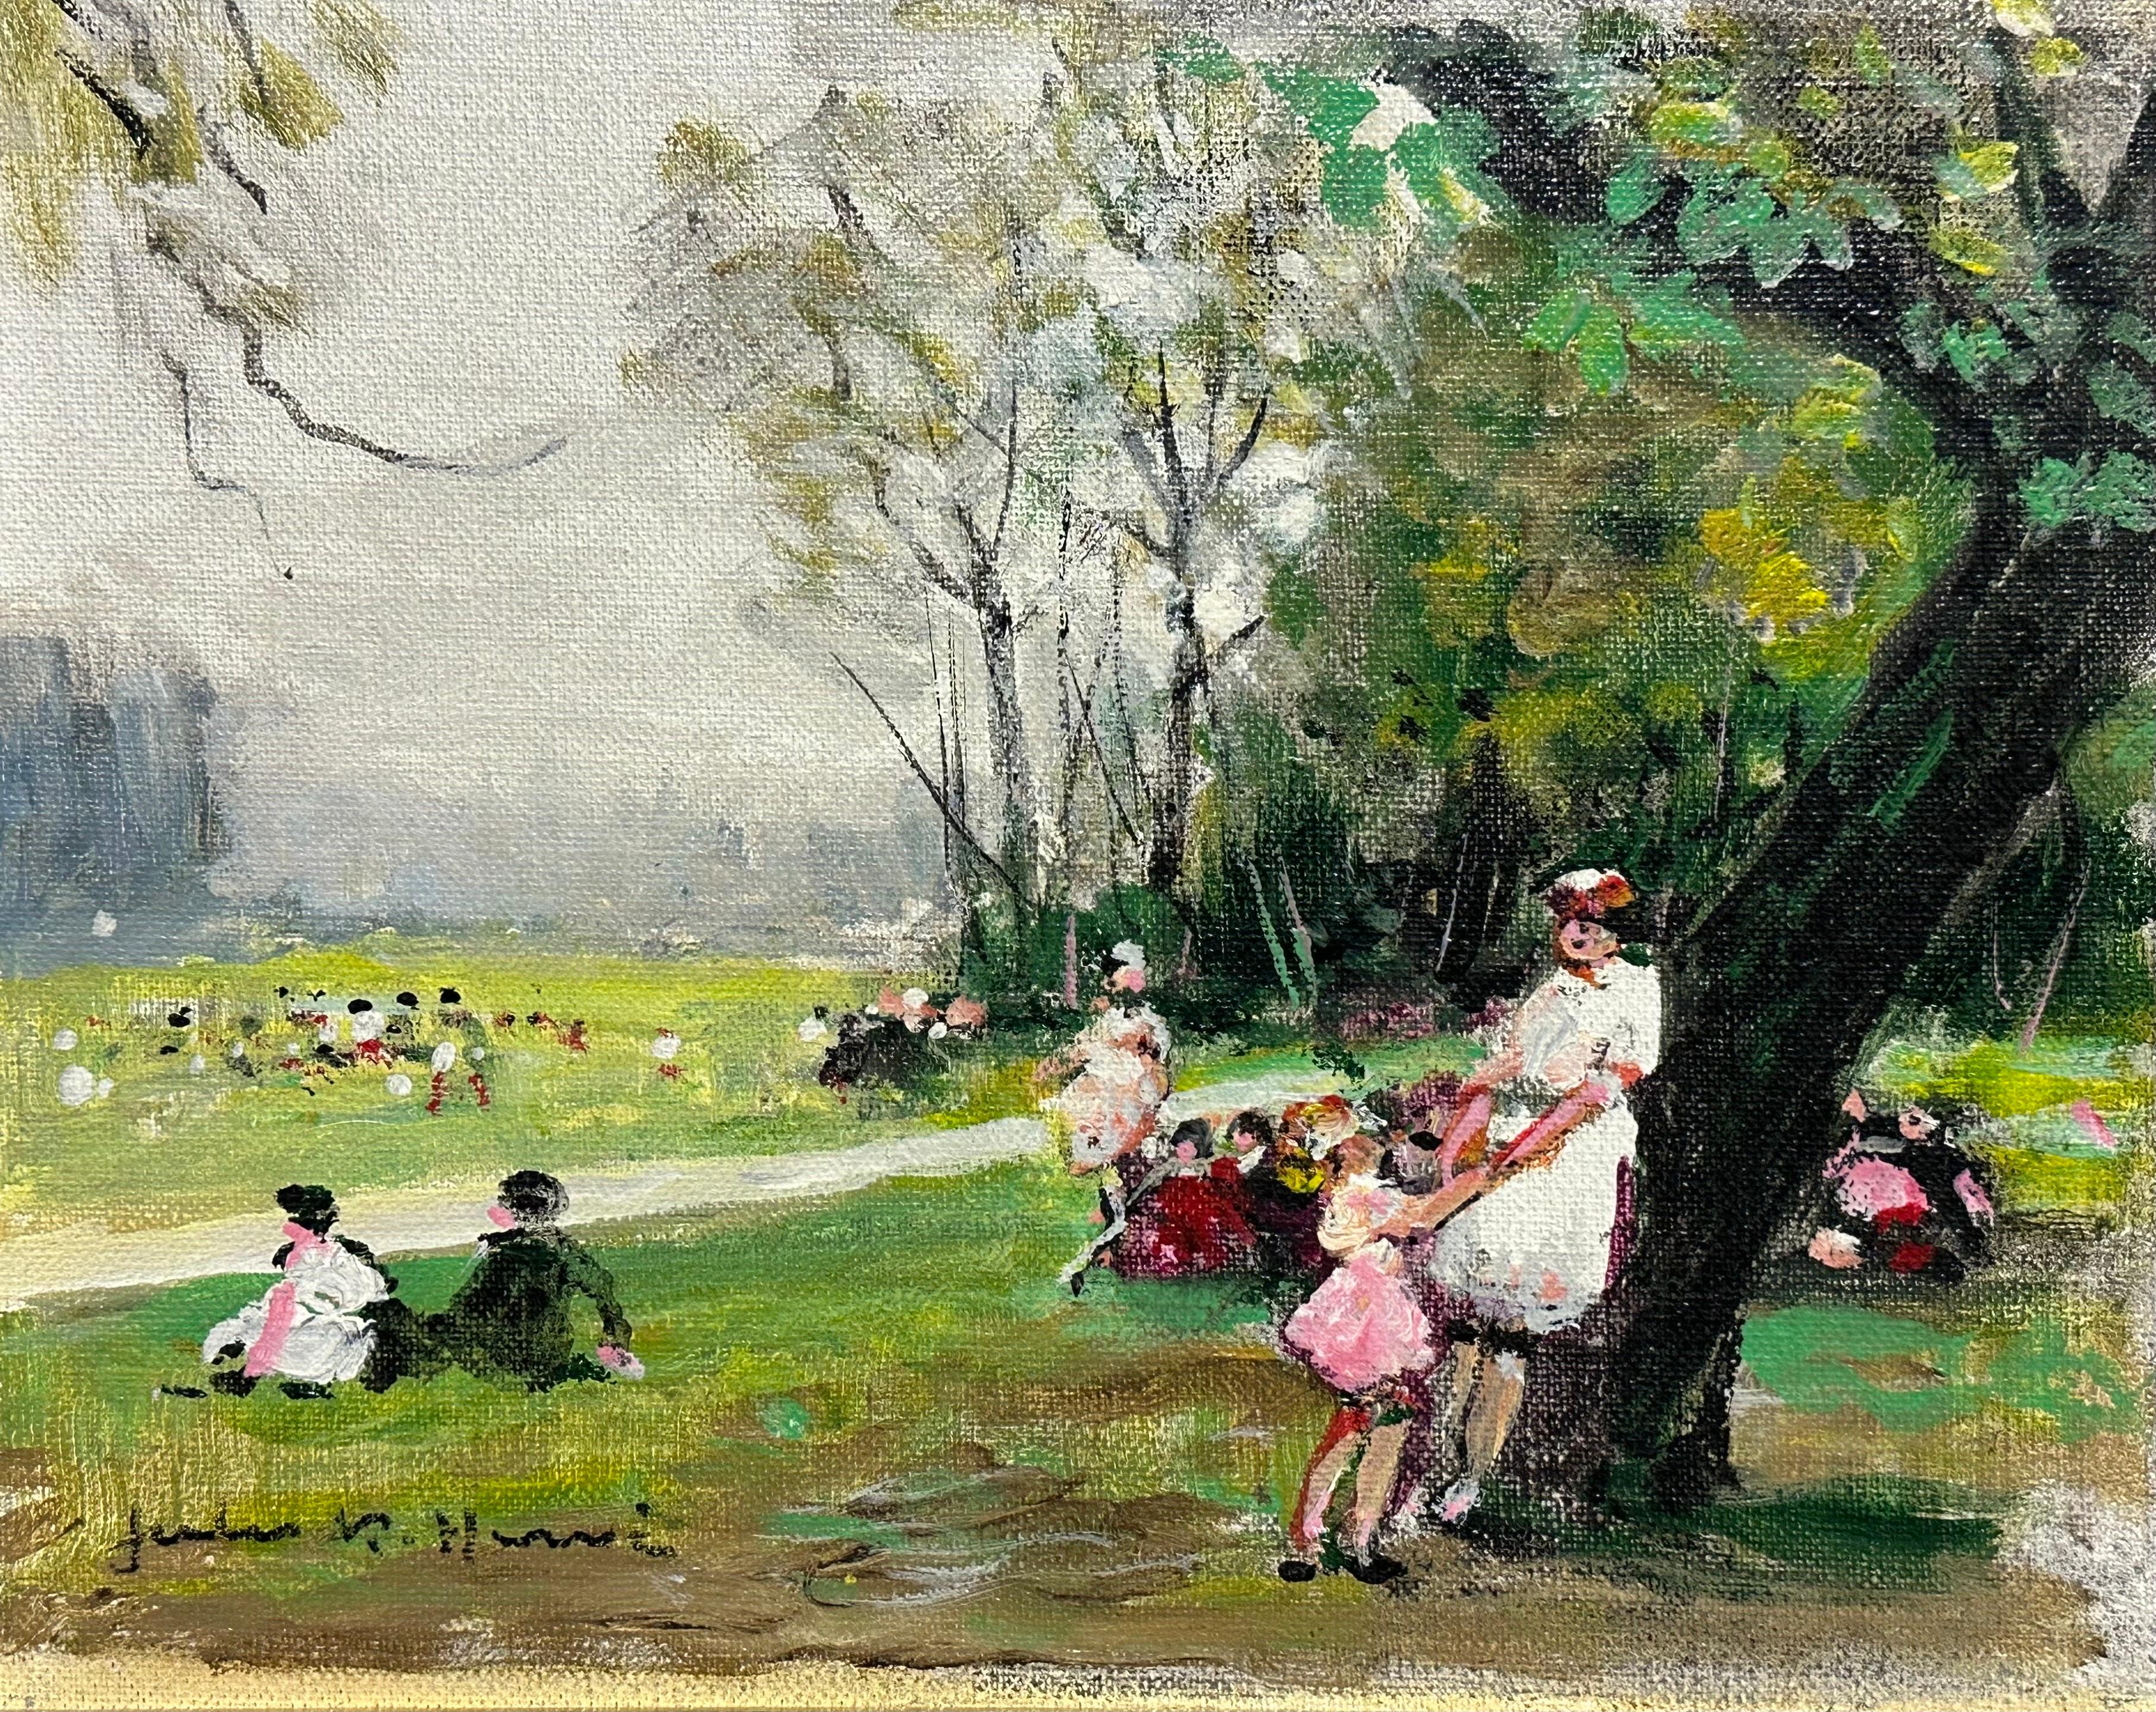 JULES RENE HERVE (1887-1981) Families Playing in Parkland Signed Original Oil - Brown Landscape Painting by Jules René Hervé